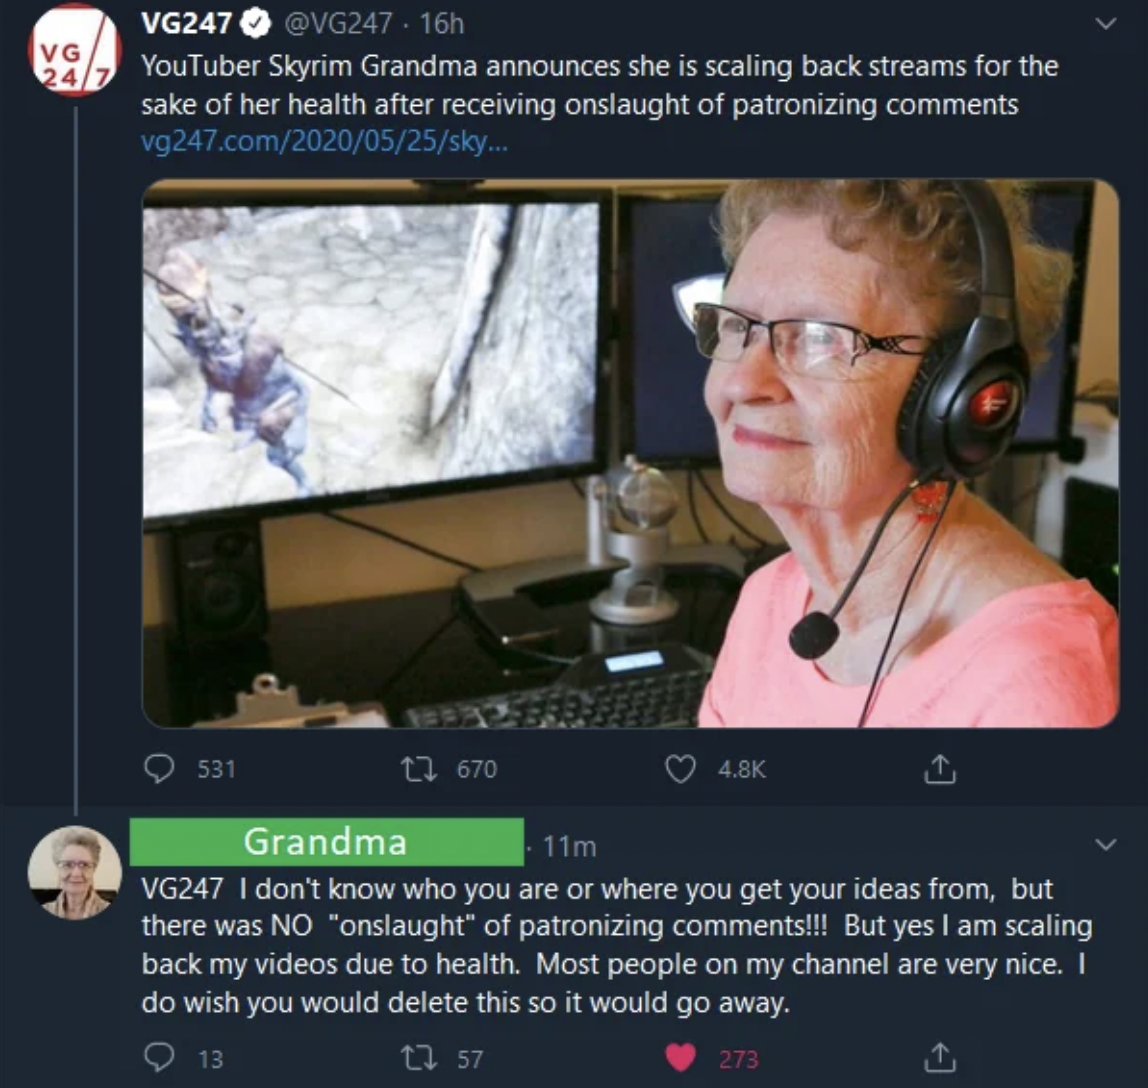 video game grandmas - Vg VG247 16h YouTuber Skyrim Grandma announces she is scaling back streams for the sake of her health after receiving onslaught of patronizing vg247.comsky... 531 12 670 Grandma 11m VG247 I don't know who you are or where you get you